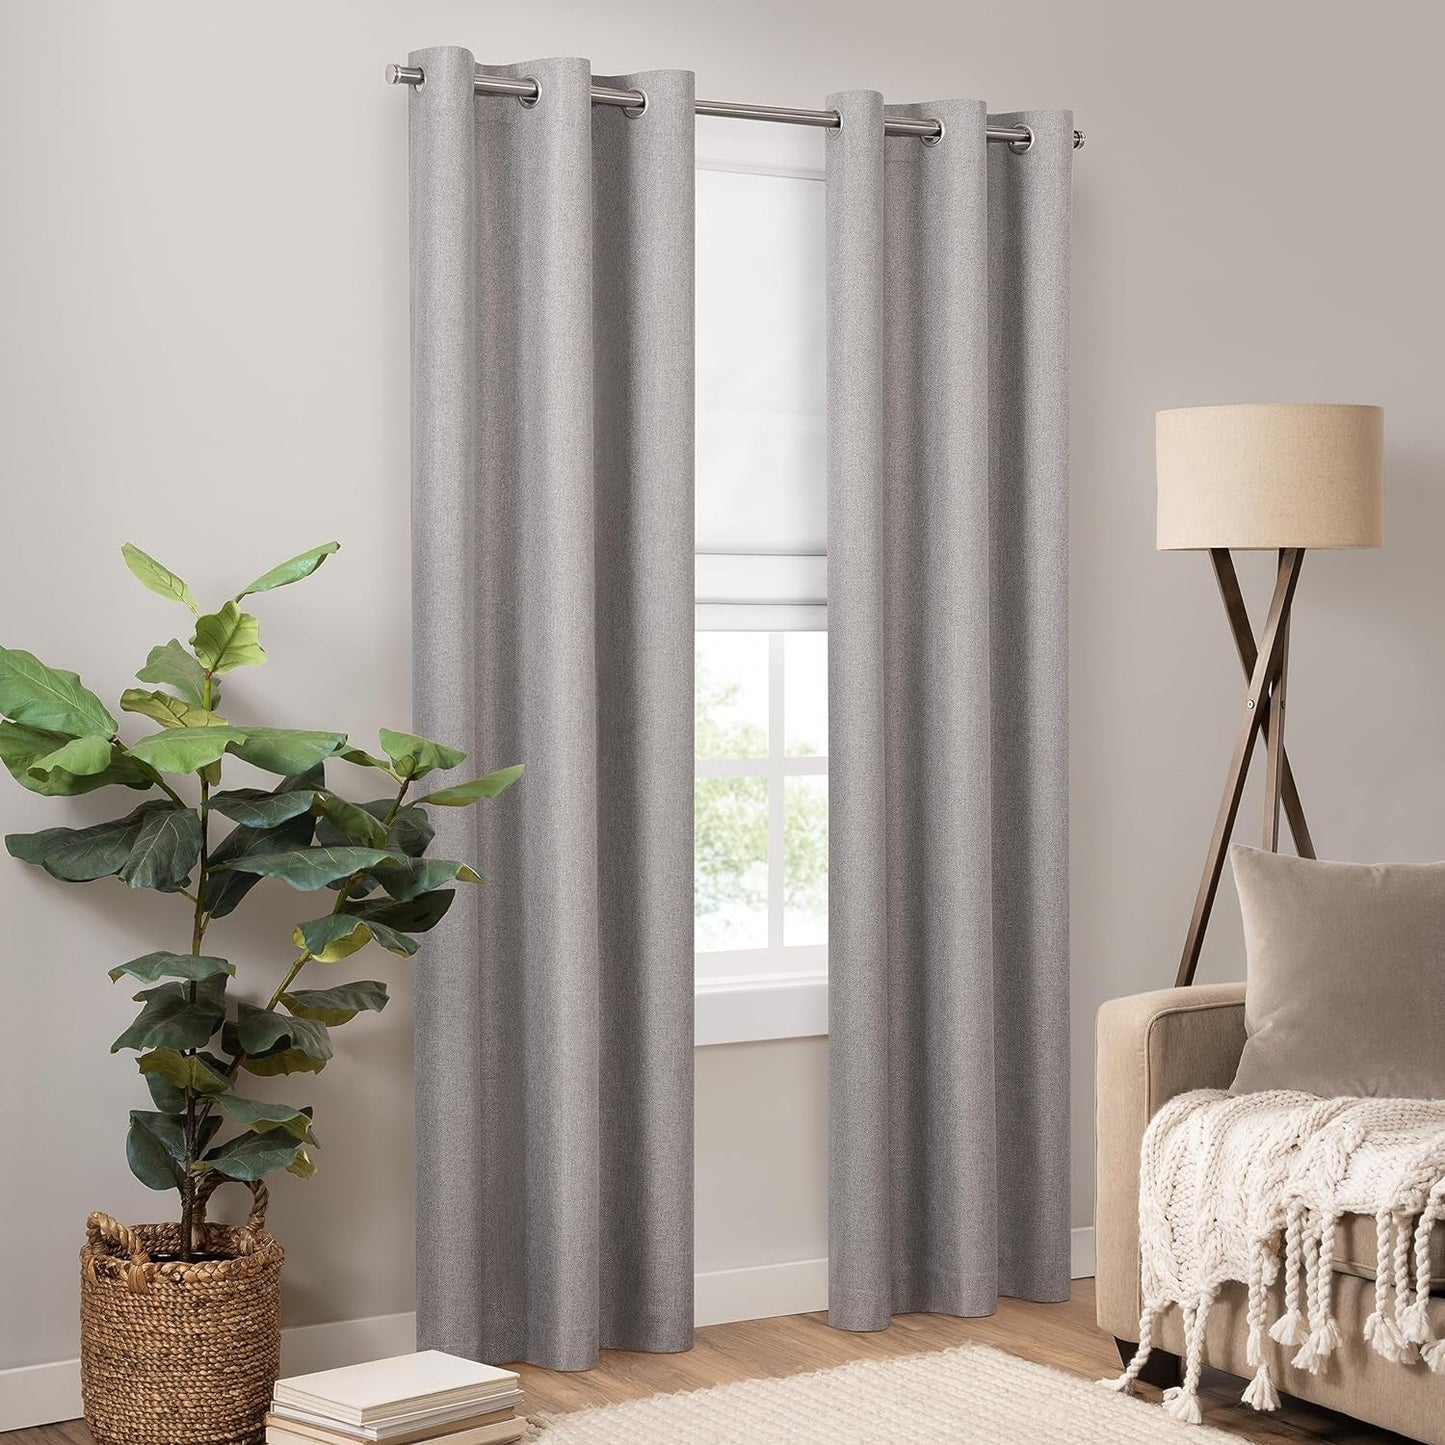 Eclipse Lane Cordless Roman Shades for Windows, Room Darkening, 47 in Wide X 64 in Long, Noise Reducing and Energy Efficient Window Treatments for Living Room, Bedroom or Office, White